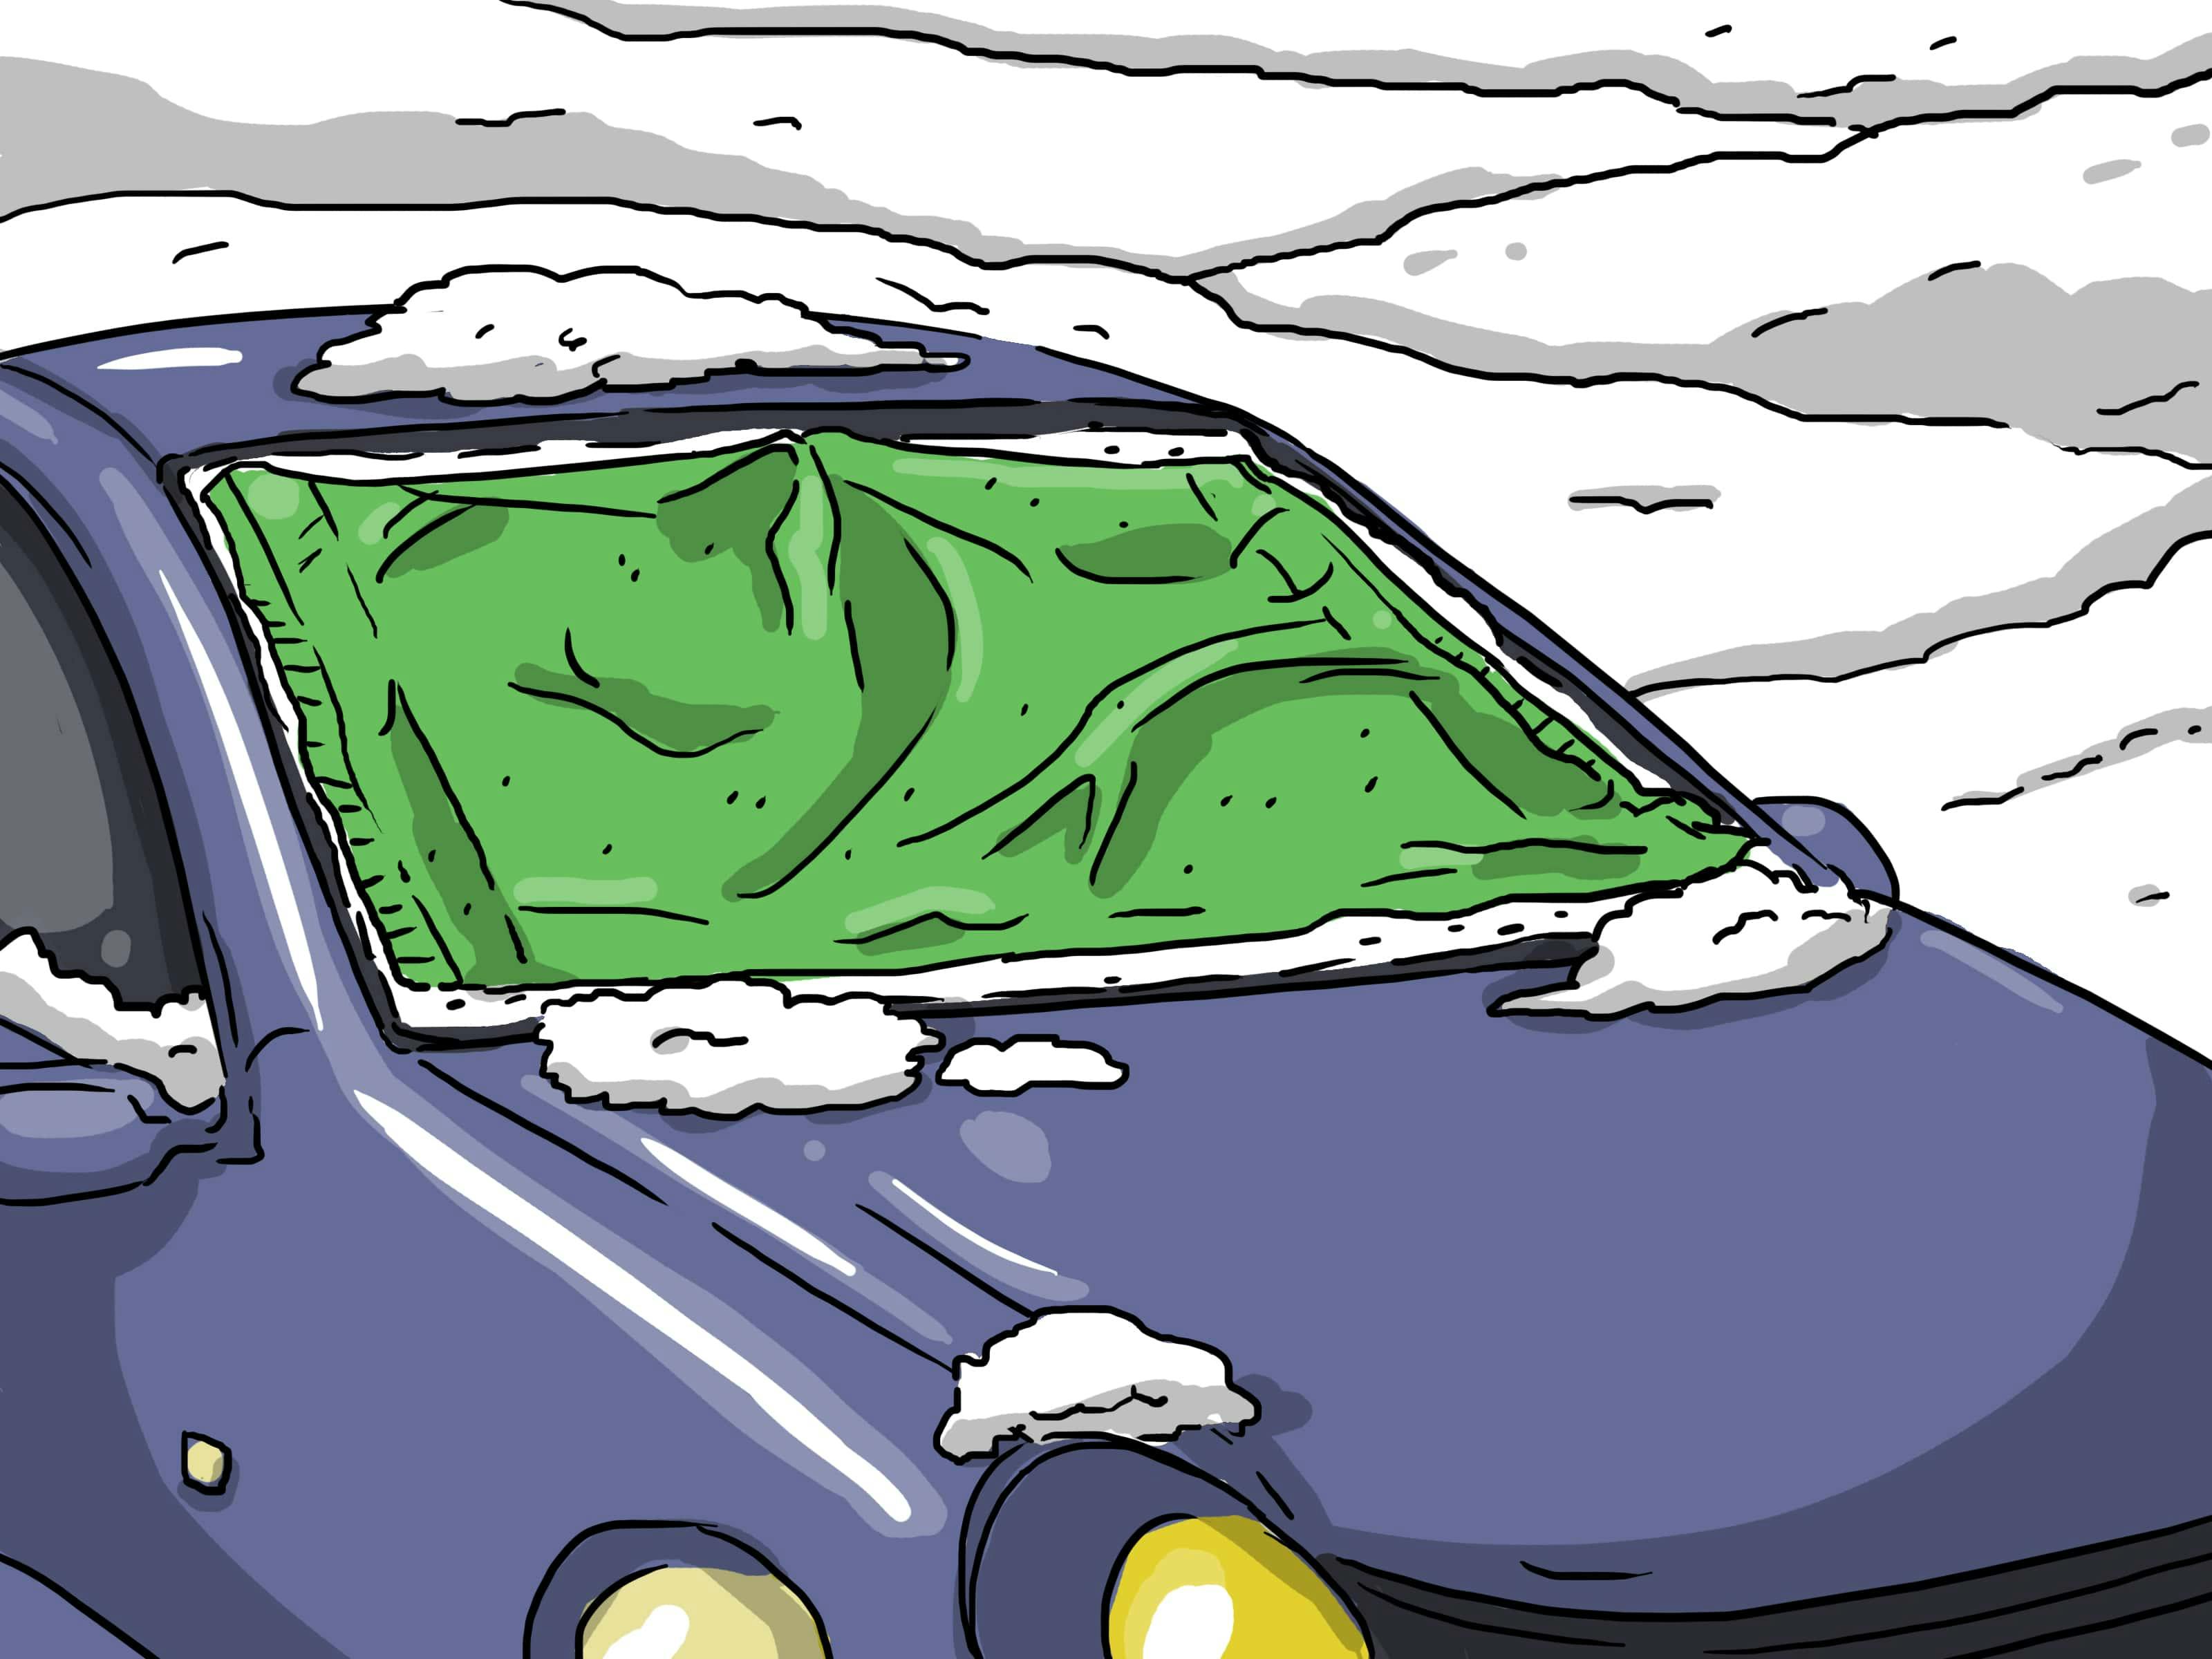 Cover your car windshield with a blanket before a big snowstorm.